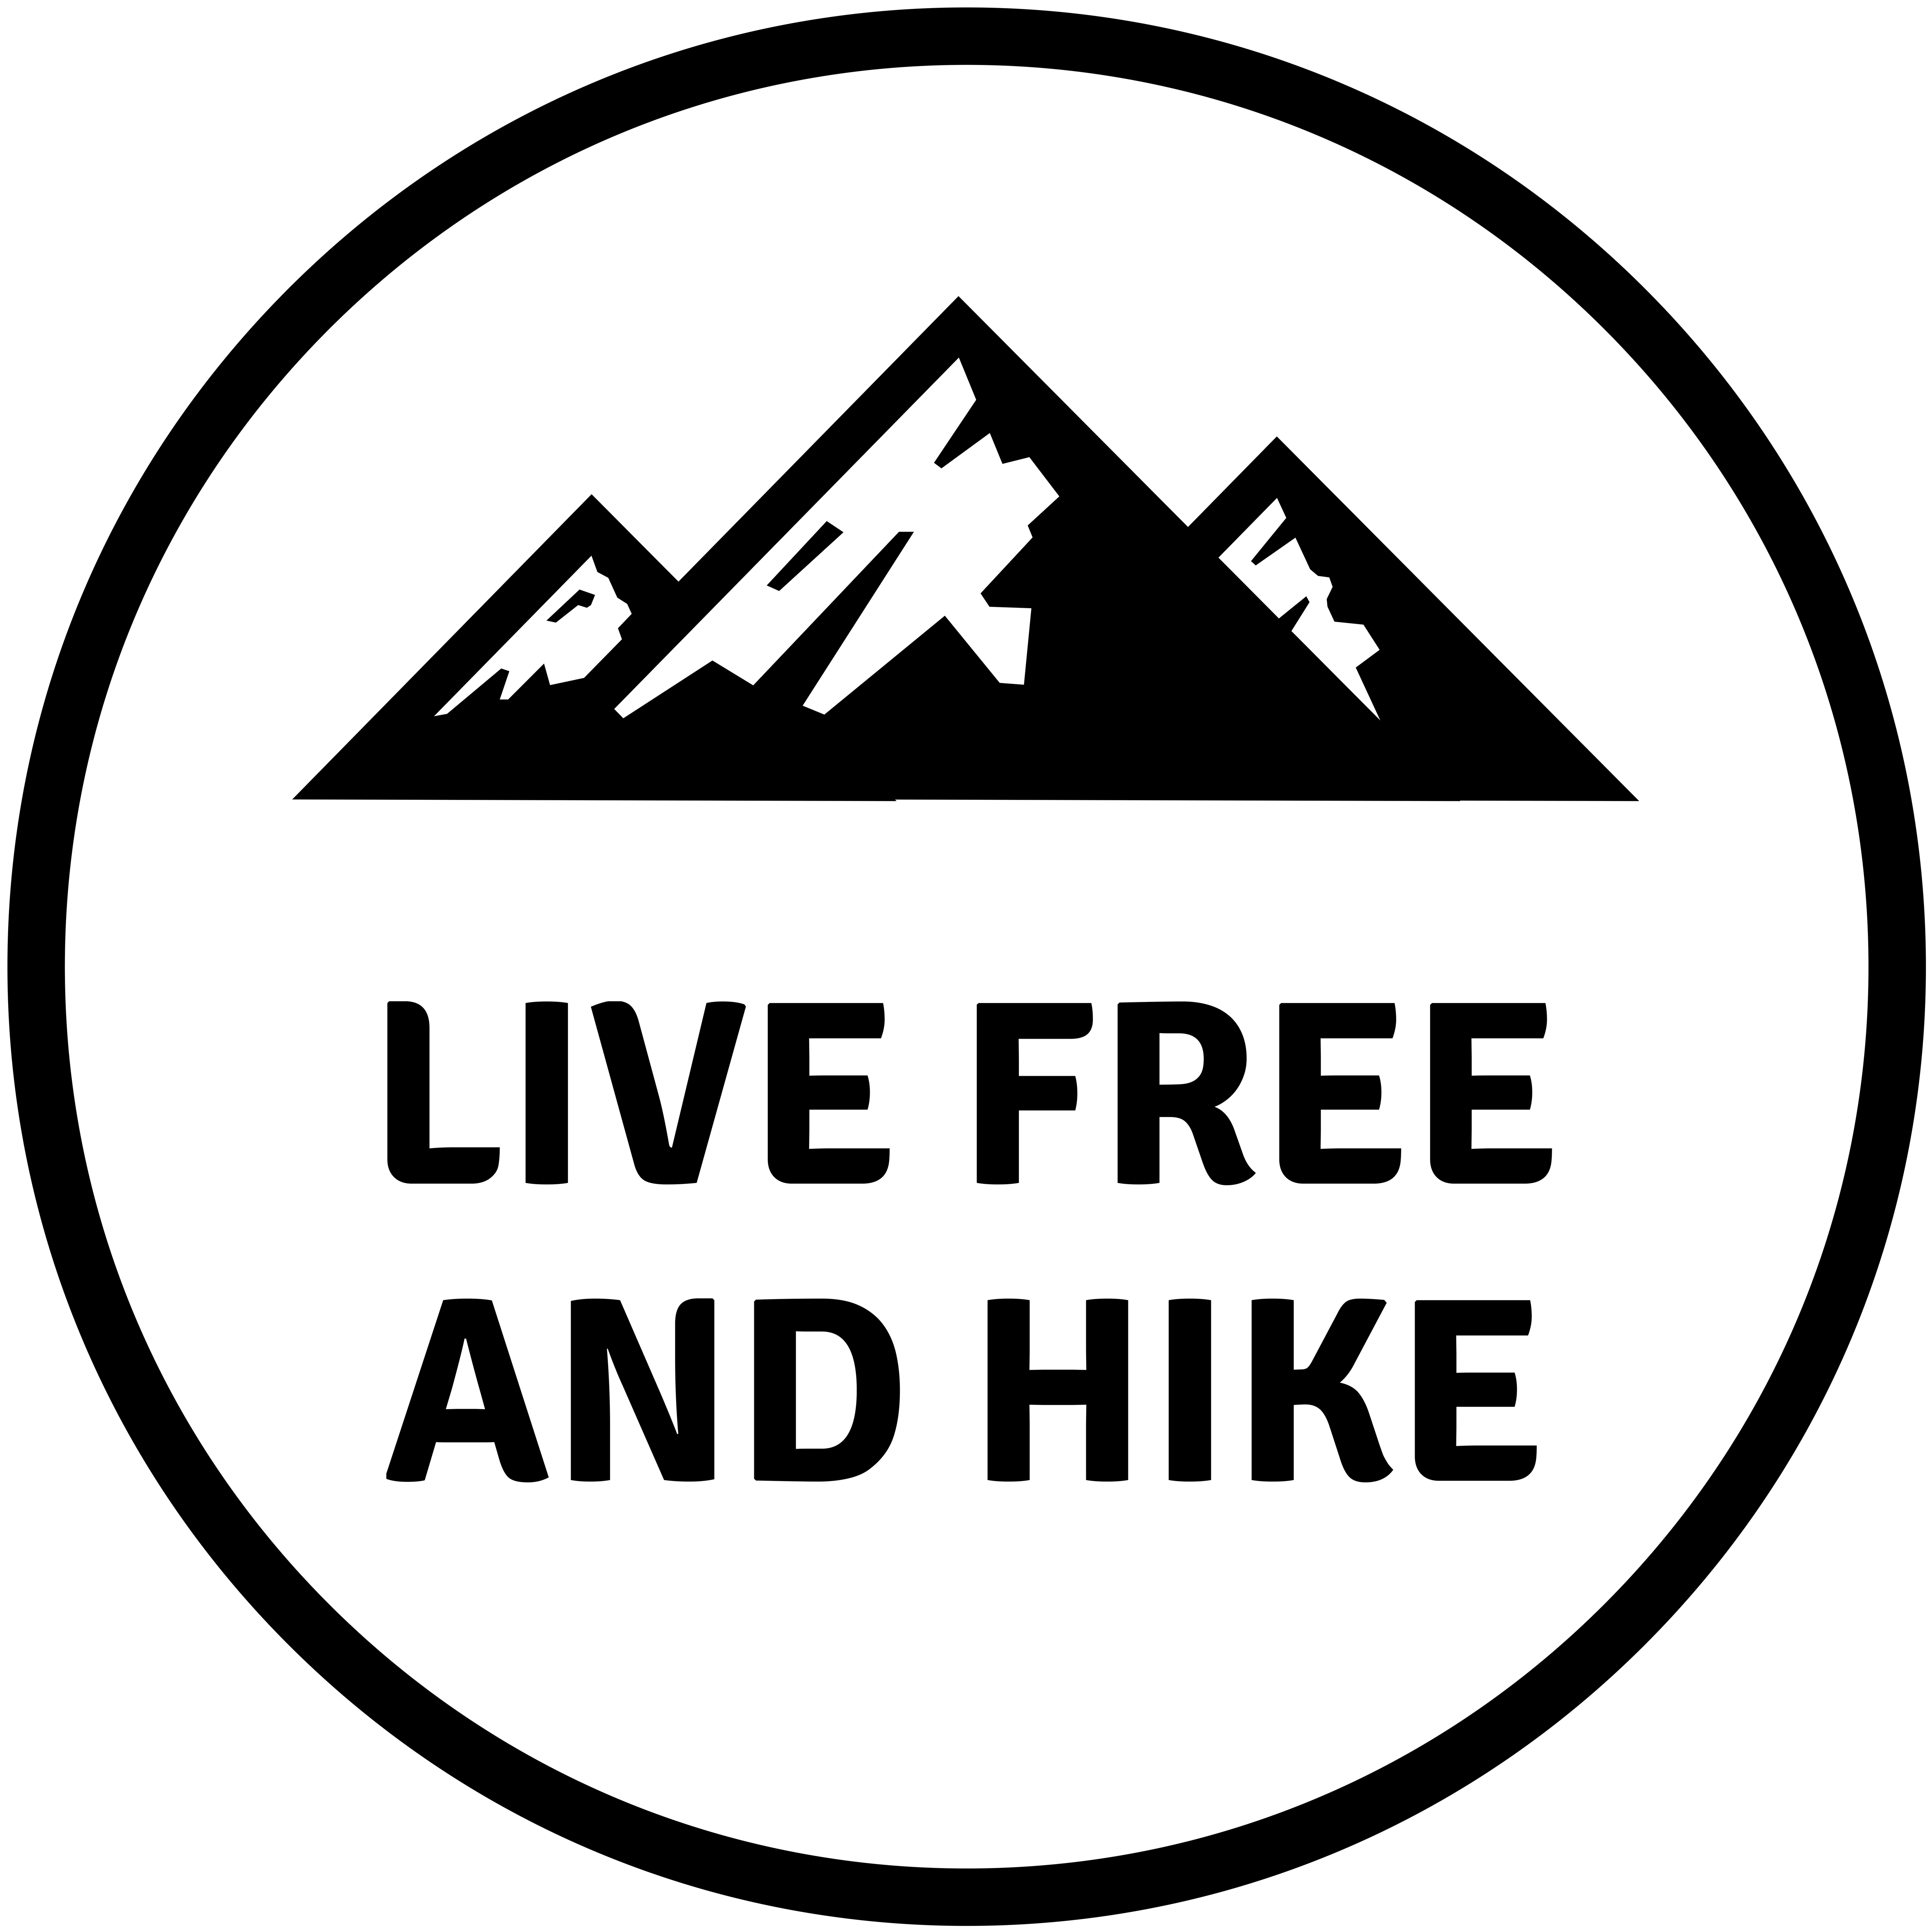 Live Free And Hike black and white Sticker